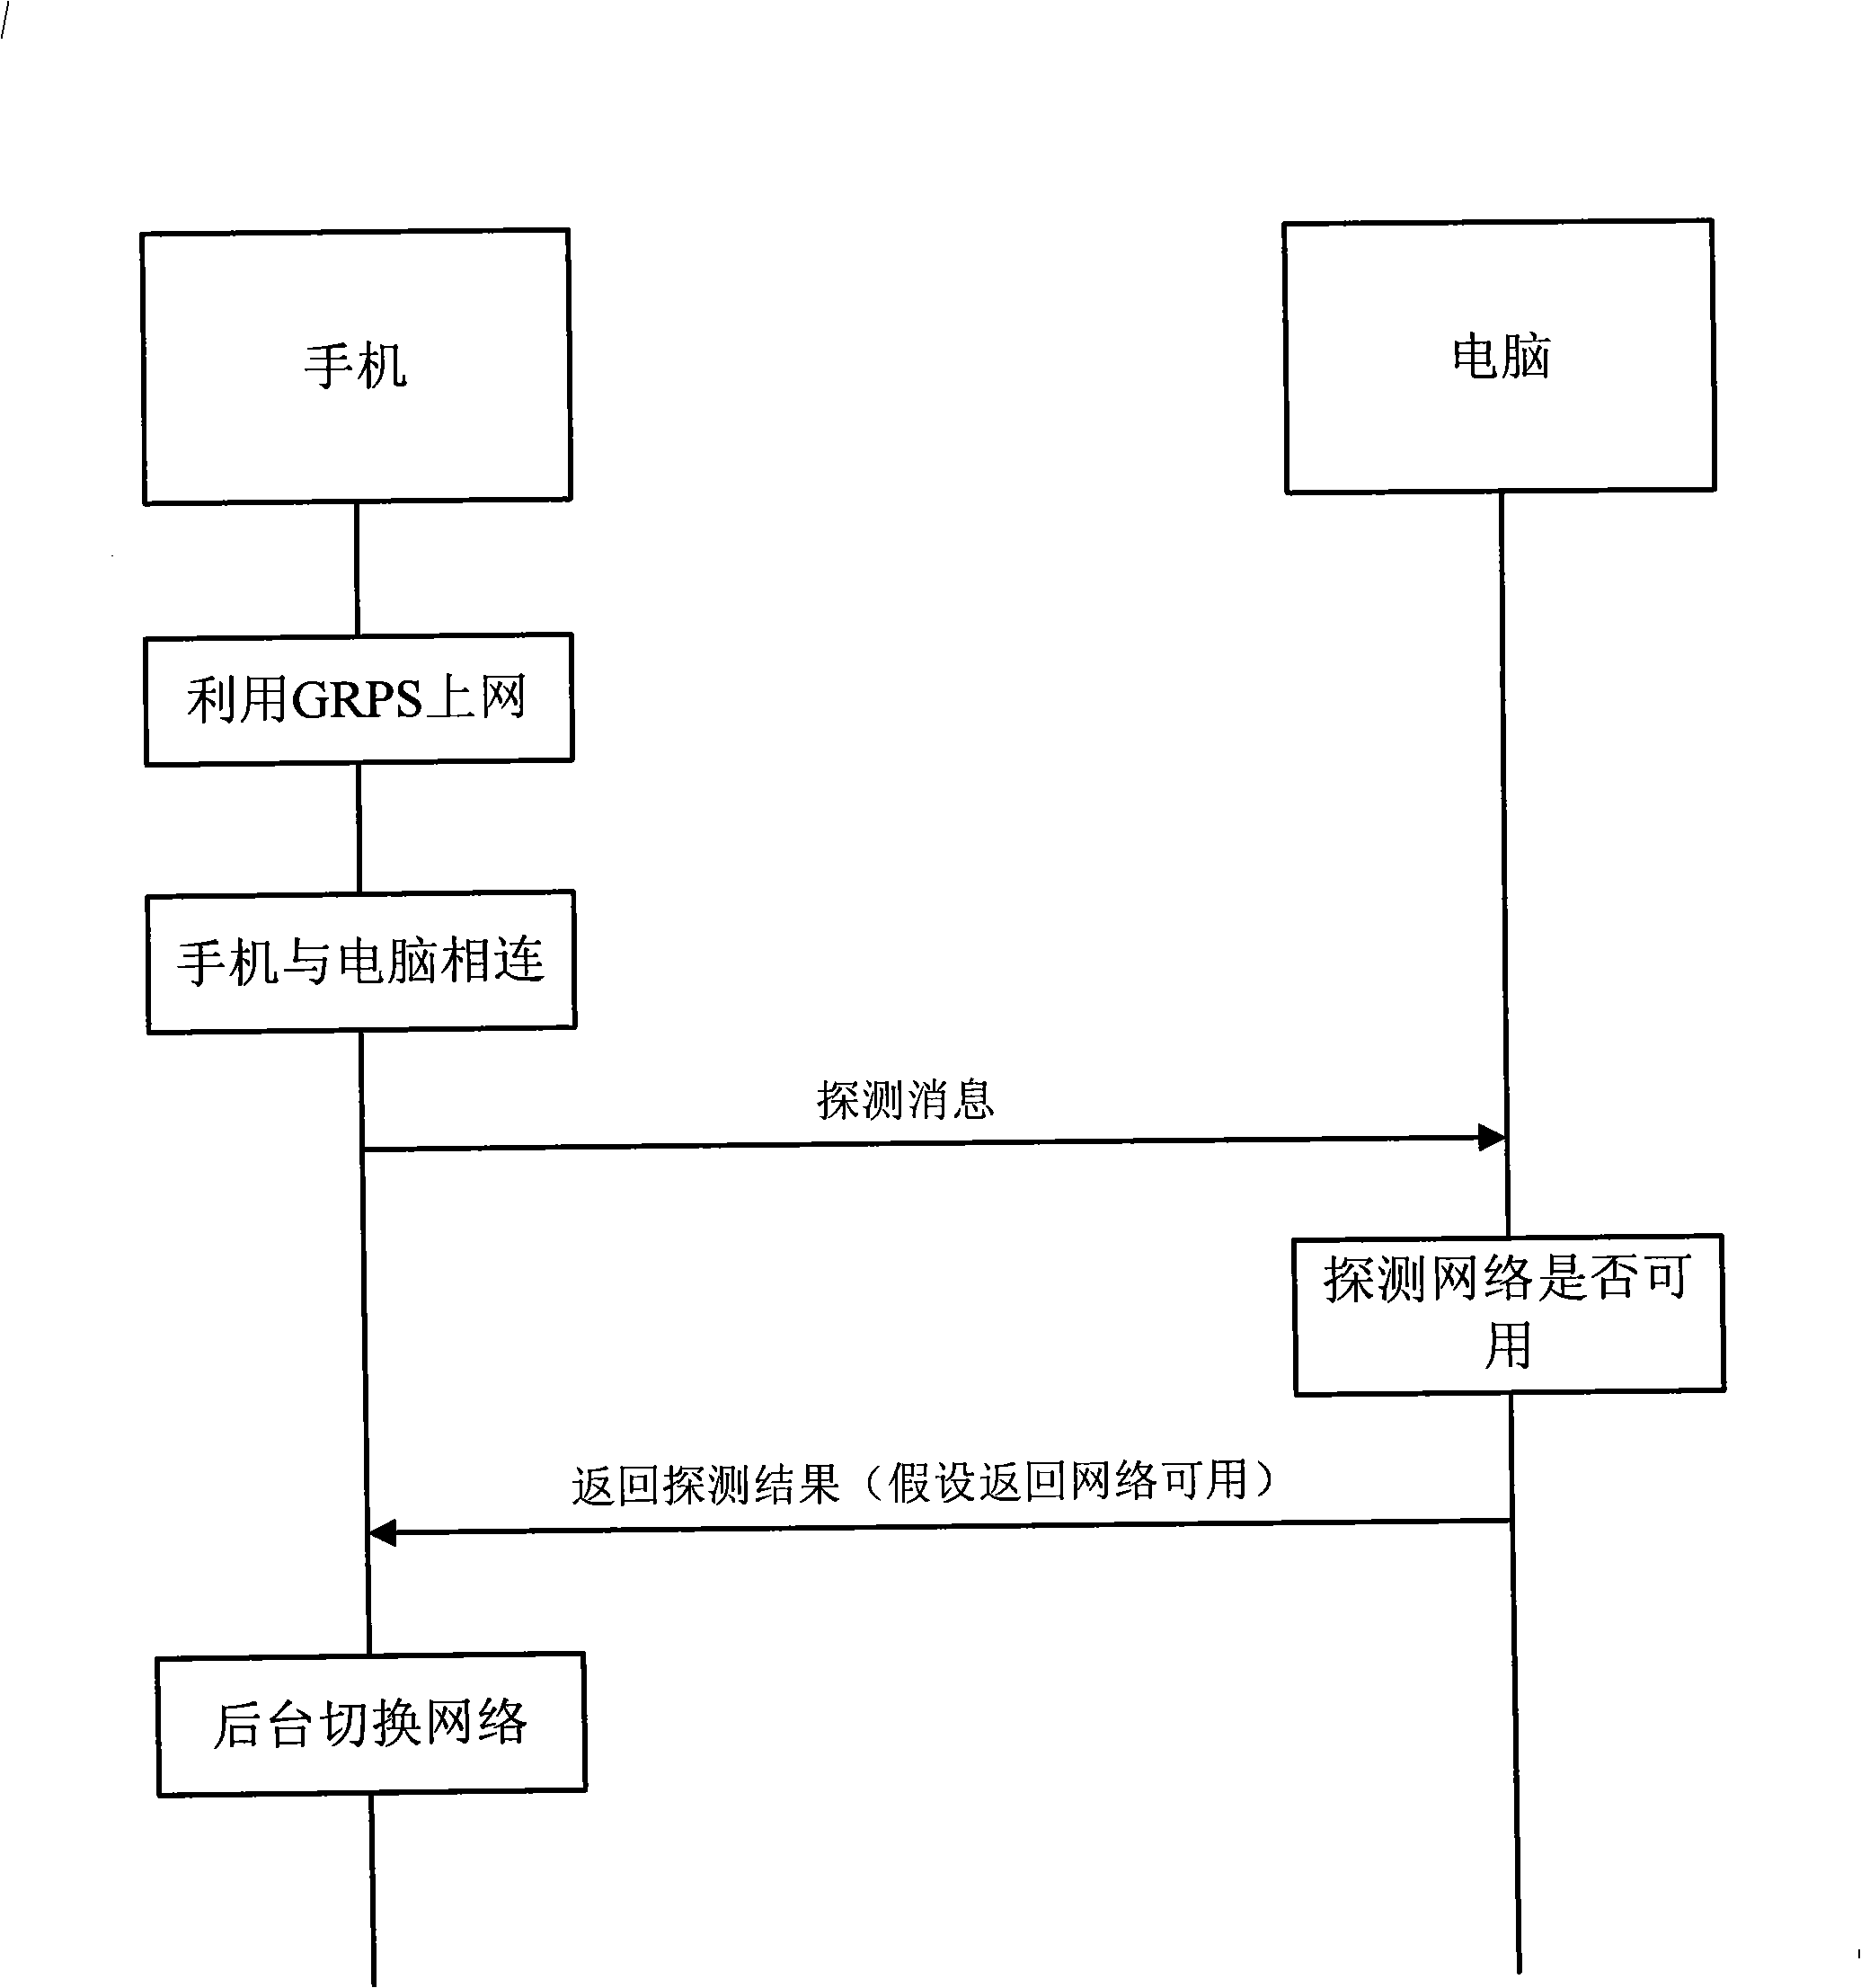 Terminal and method for automatically switching network channel